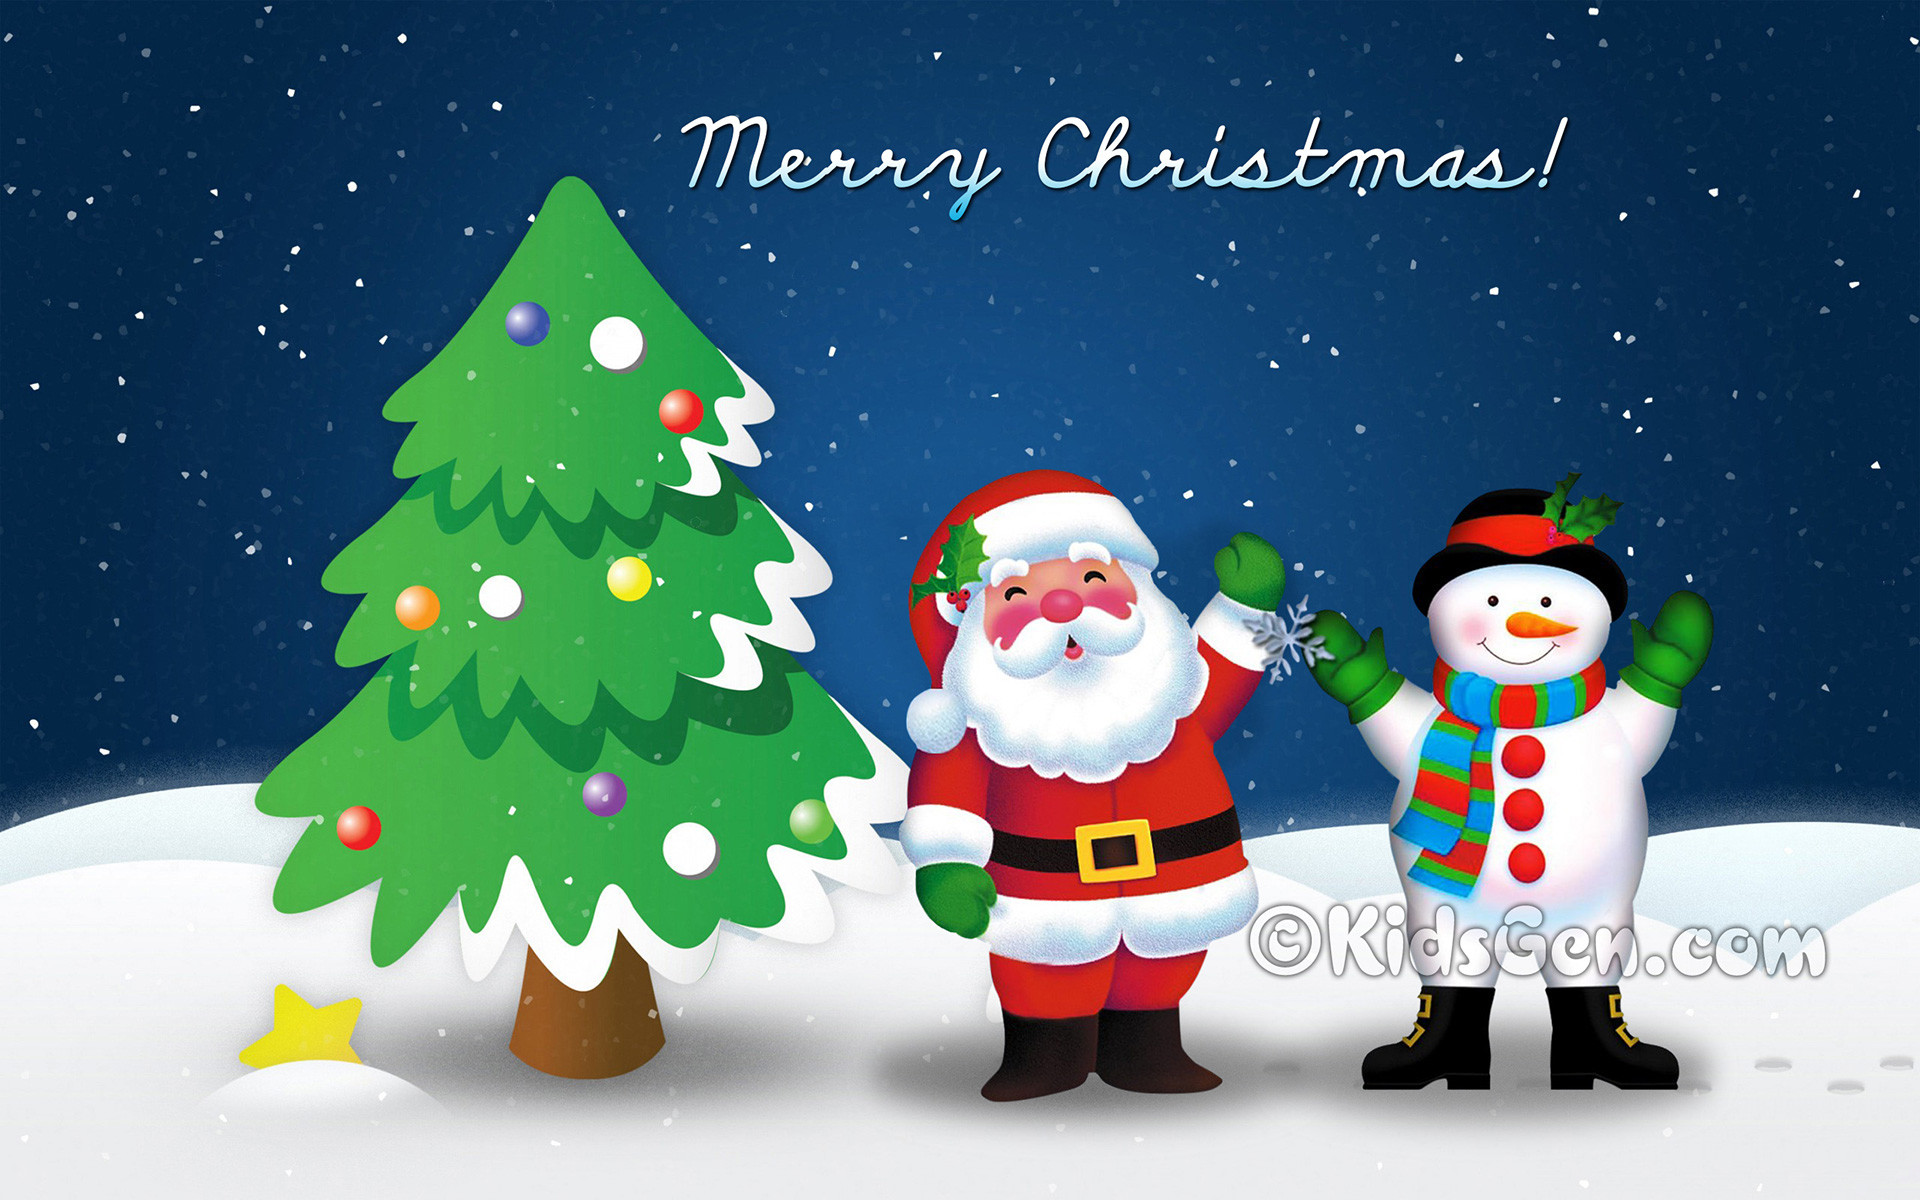 1920x1200 Santa and Snowman in Christmas night